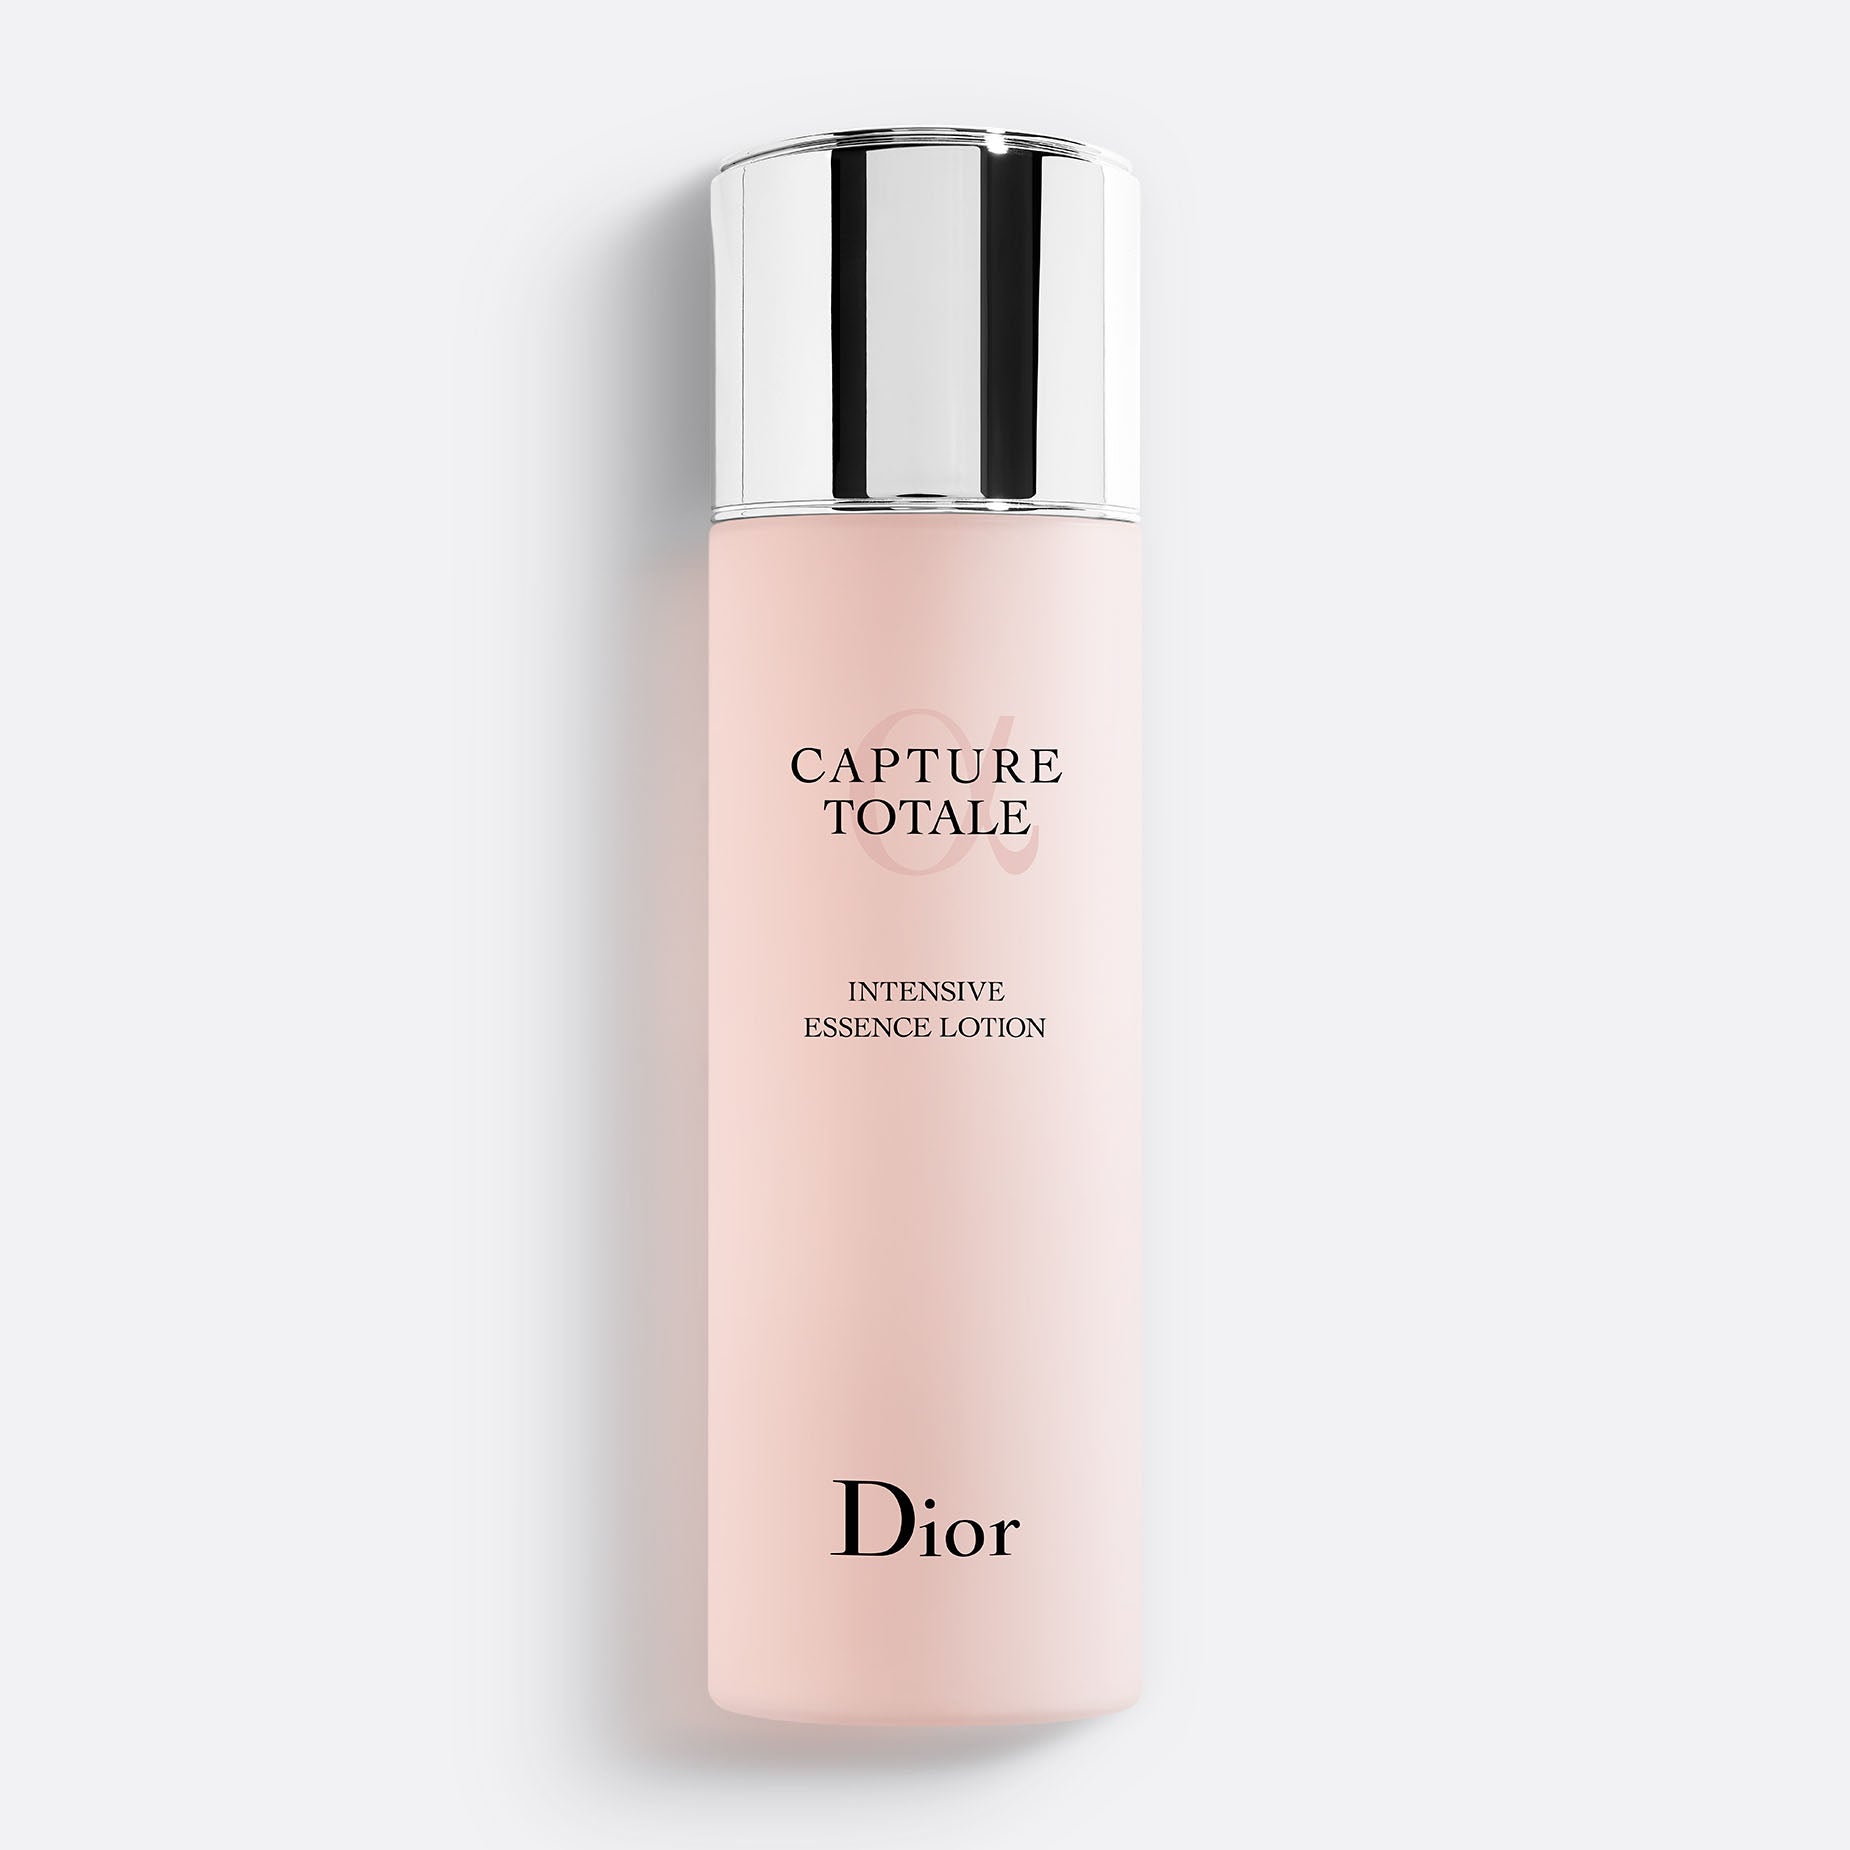 CAPTURE TOTALE INTENSIVE ESSENCE LOTION ~ Face lotion - intense preparation - radiance and strengthened skin barrier